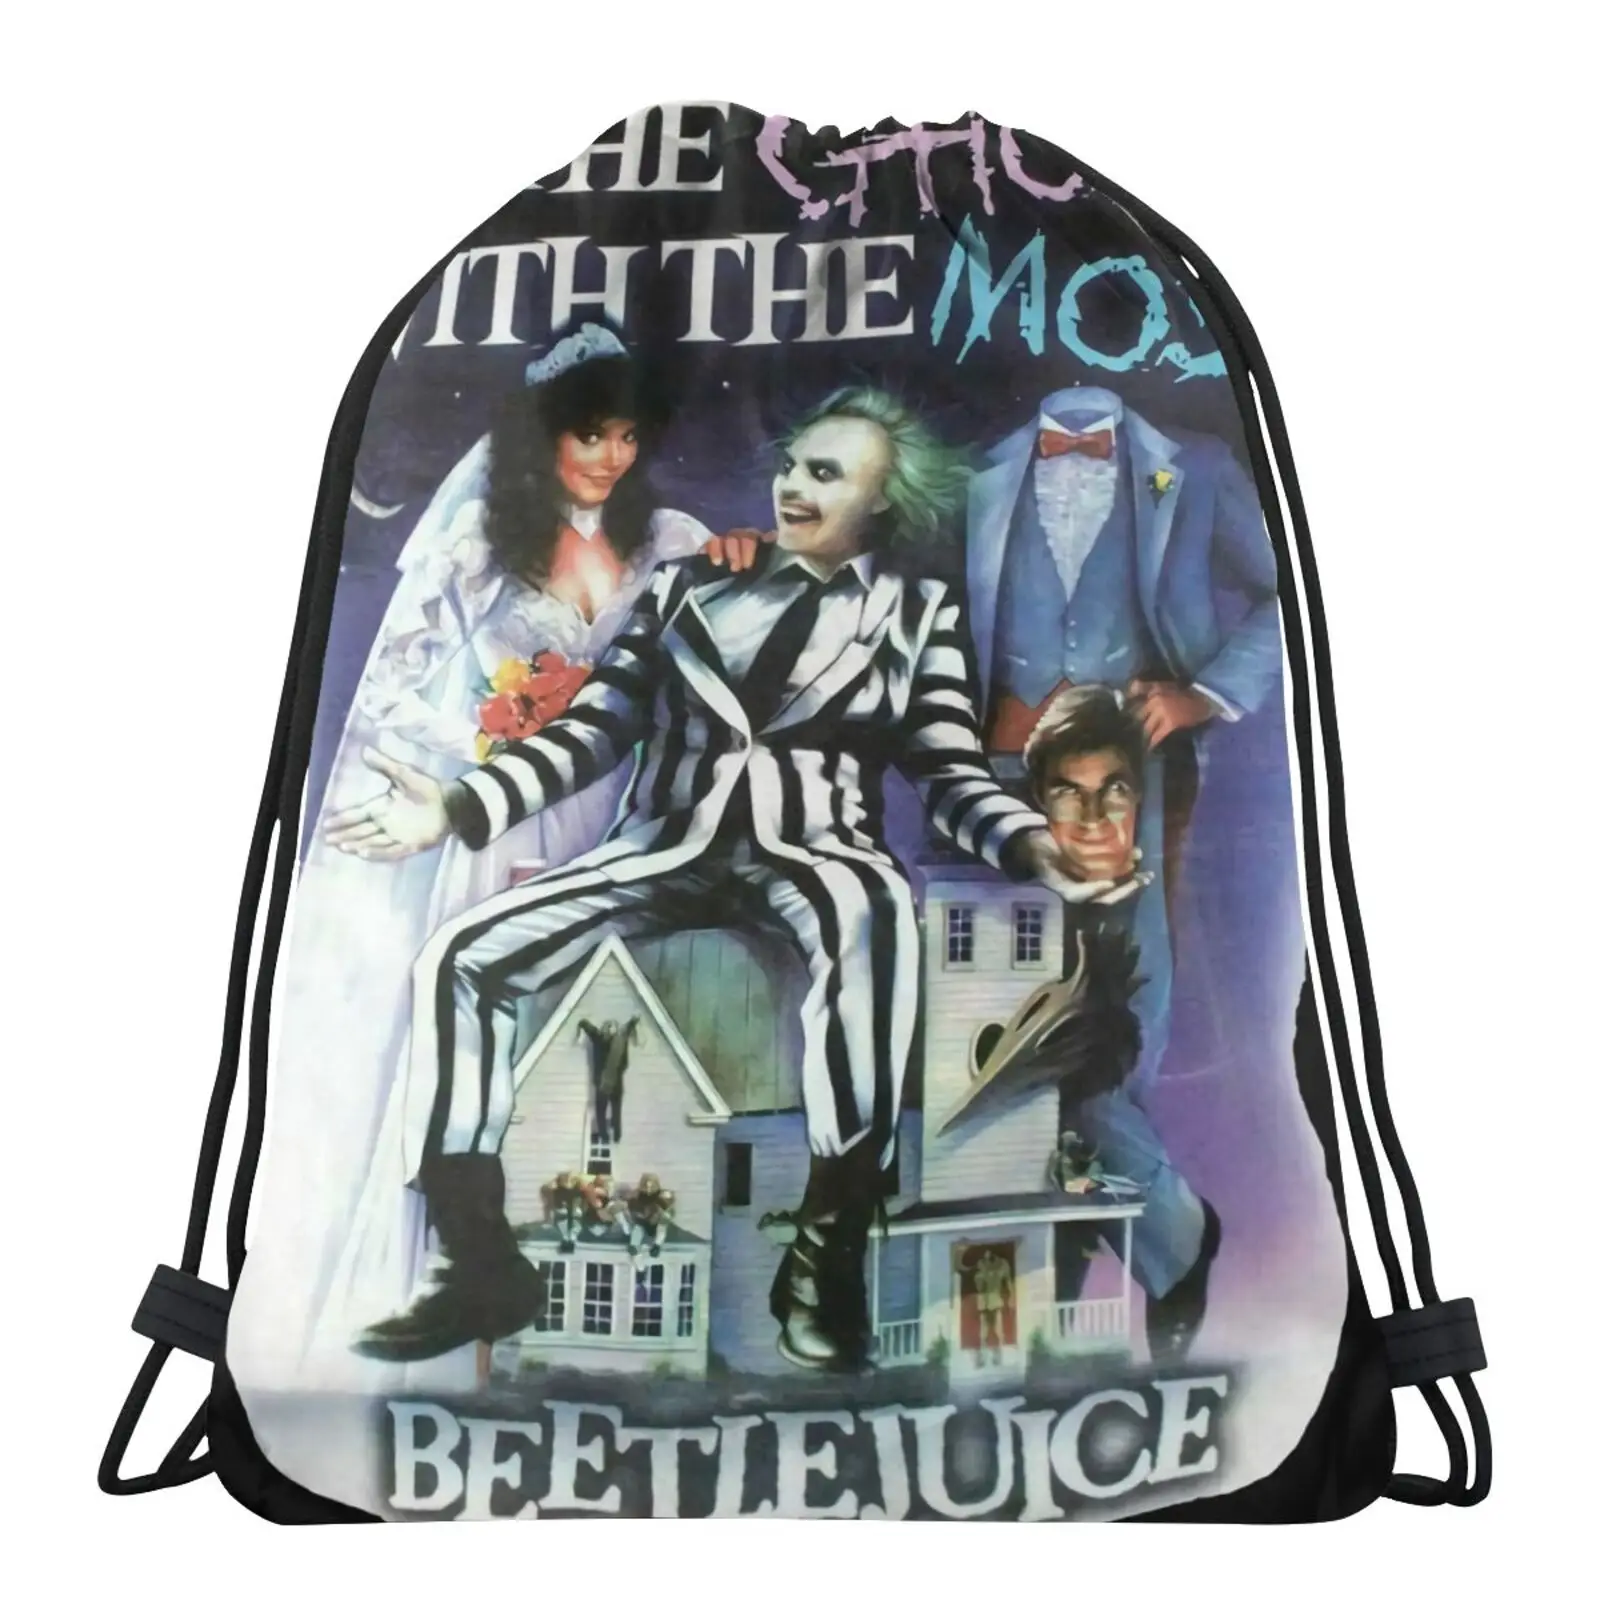 

Beetlejuice Ghost With The Most Bag Bags For Girls Shoe Backpack Fabric Bags Shopping Bags Package Backpack Bag Cloth Backpack